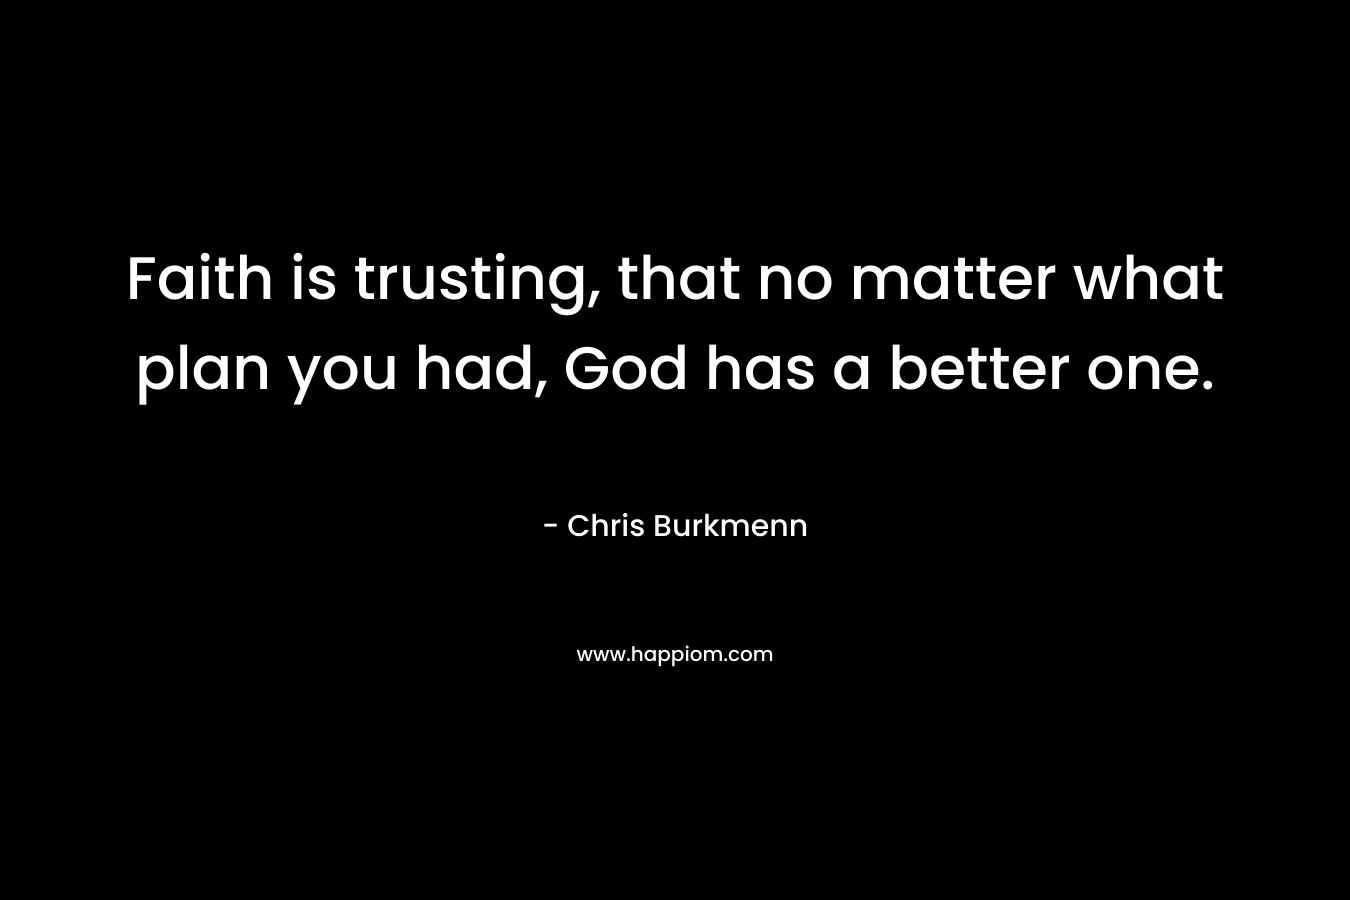 Faith is trusting, that no matter what plan you had, God has a better one.